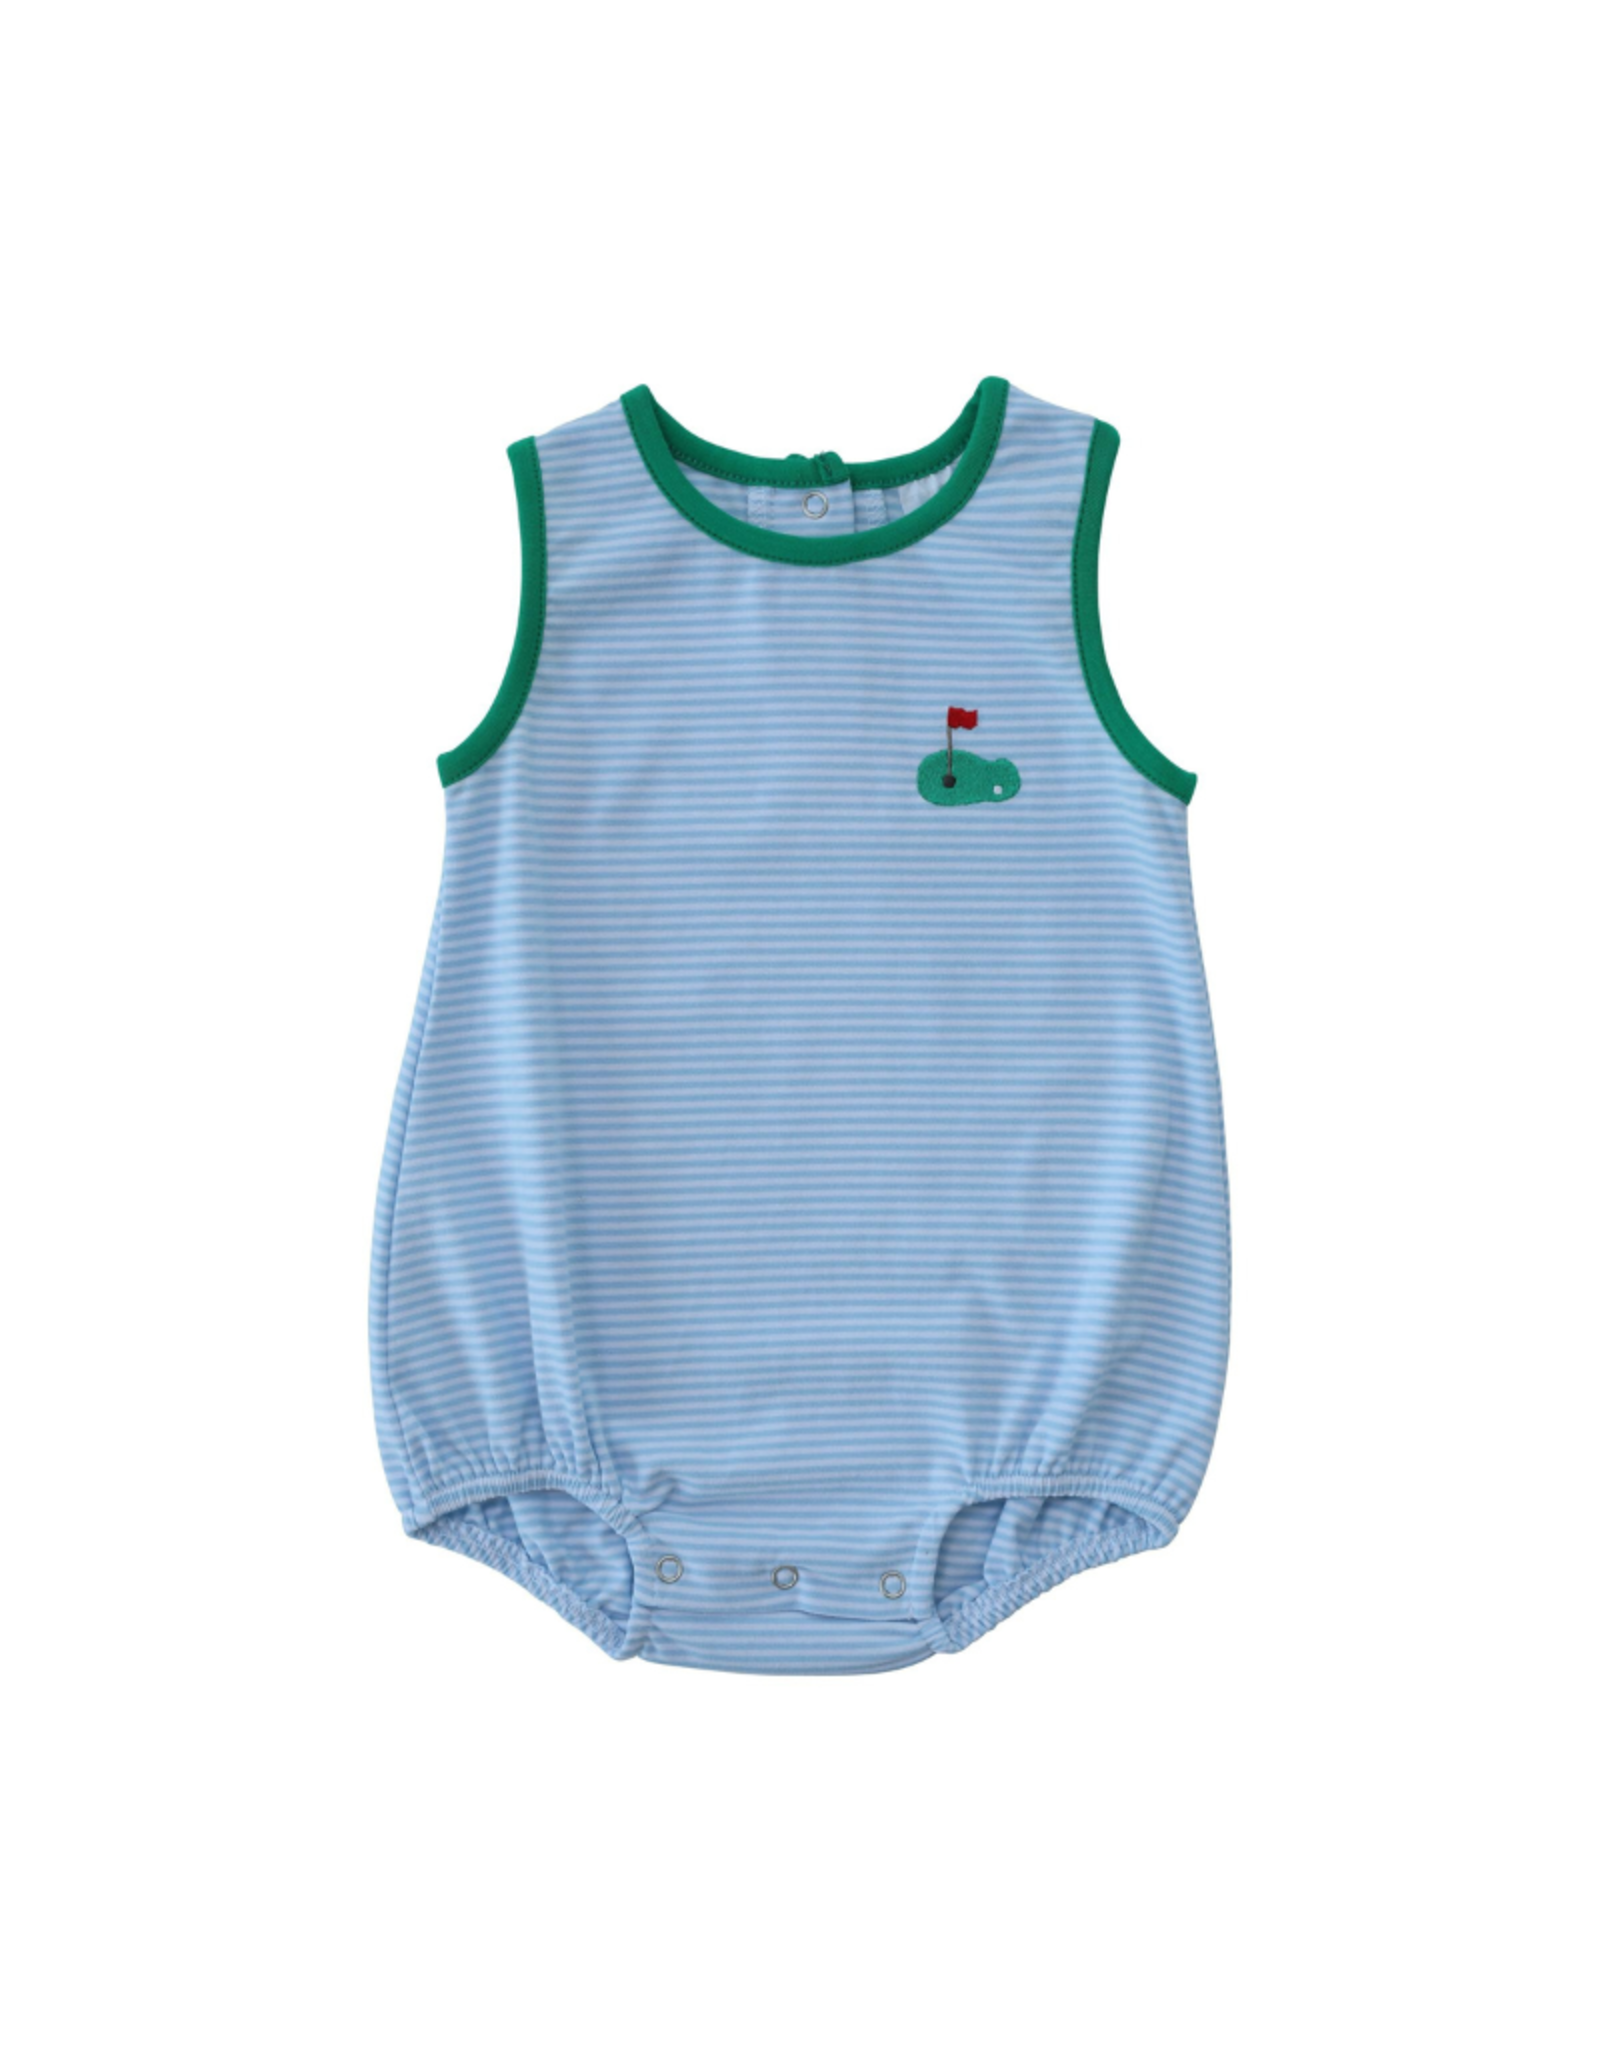 Itsy Bitsy Blue Stripe Golf Embroidered Sleeveless Bubble